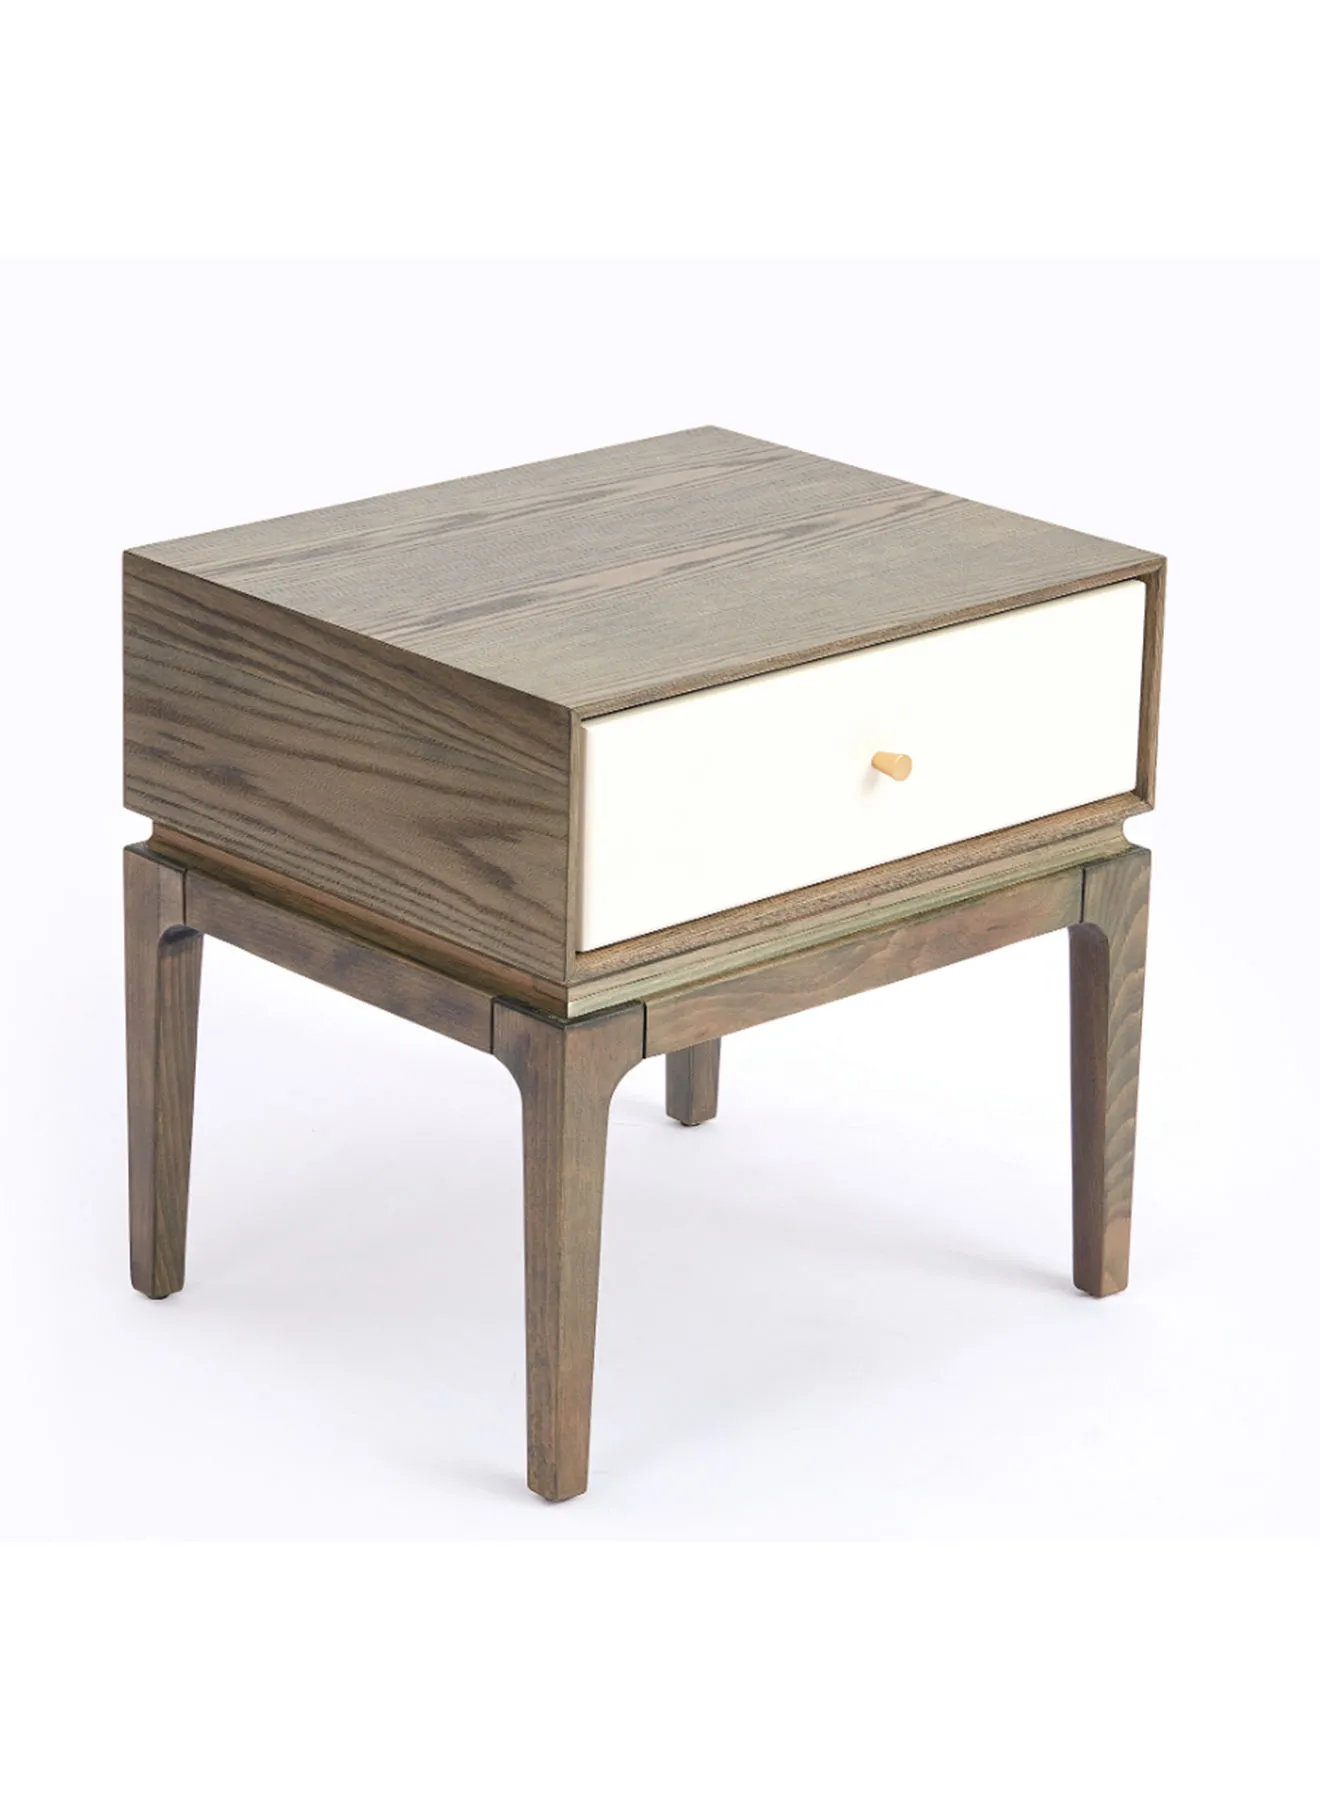 ebb & flow Bedside Table Luxurious - Size 600 X 500 X 600 Solid Wood Ash Brown Nightstand Comdina - Bedroom Furniture